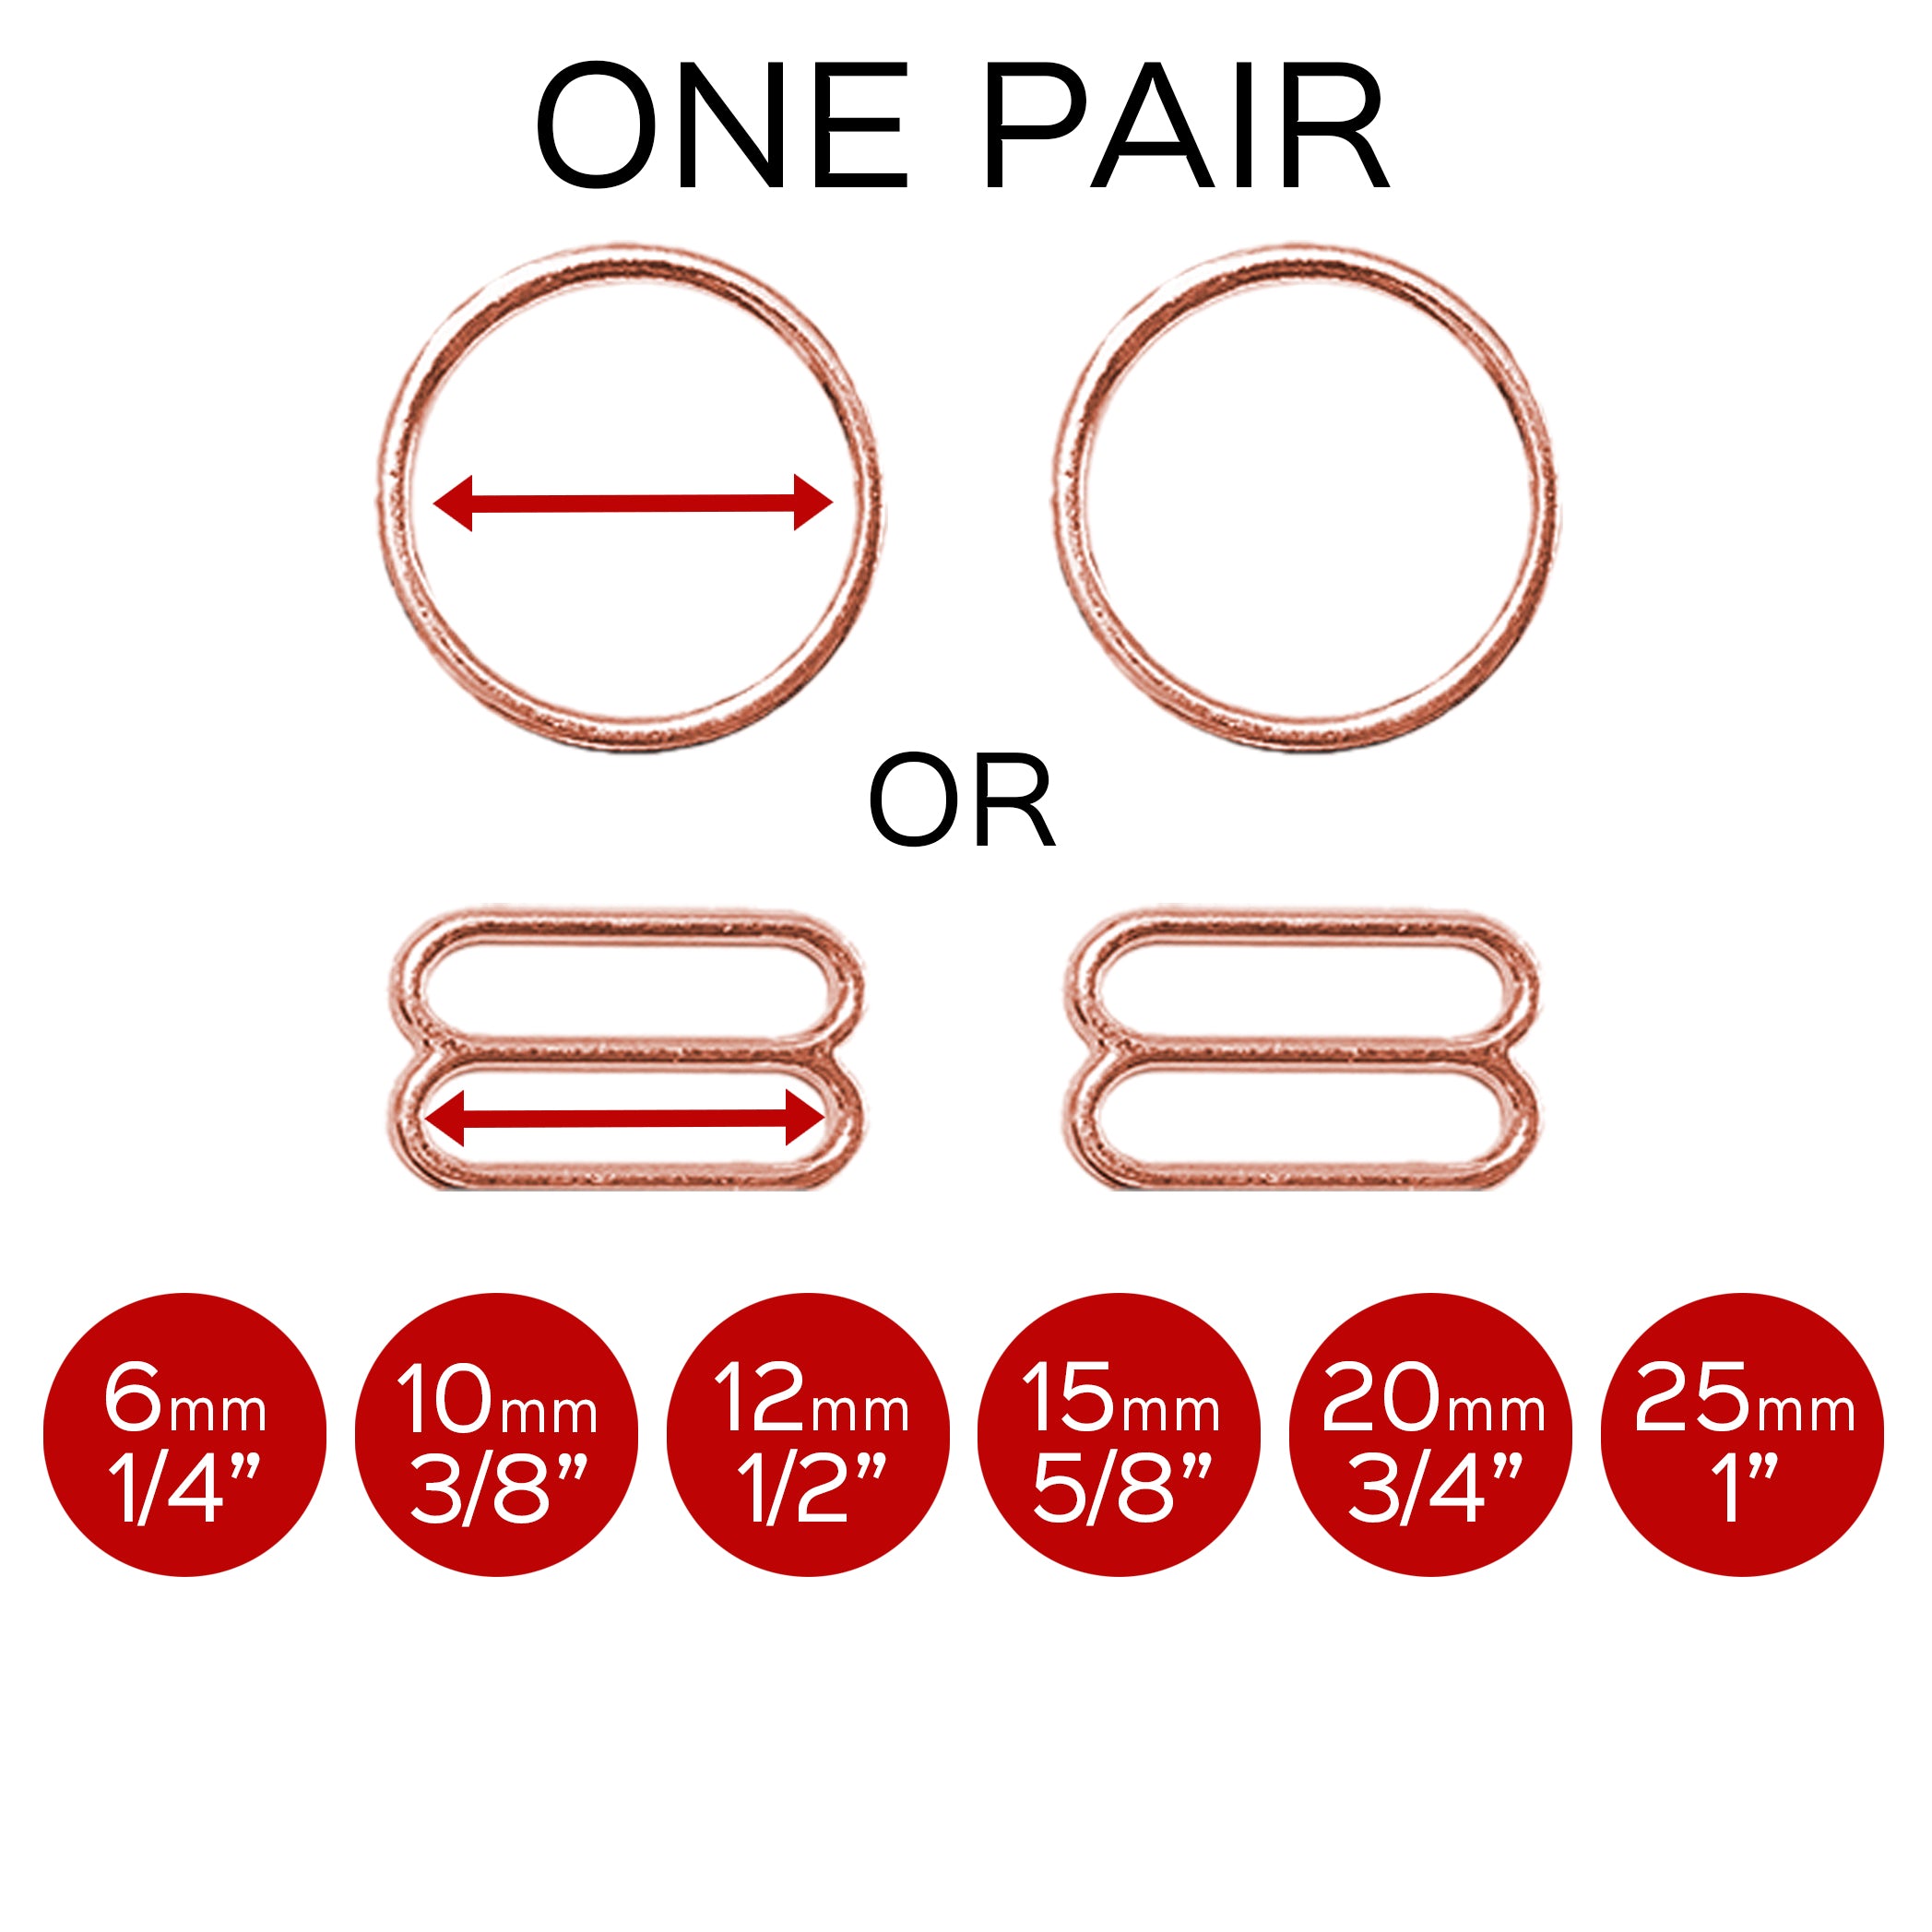 Set of 2 Rings OR 2 Sliders in Rose Gold– 1/4" (6mm), 3/8" (10mm), 1/2" (12mm), 5/8" (15mm), 3/4" (20mm)-Stitch Love Studio